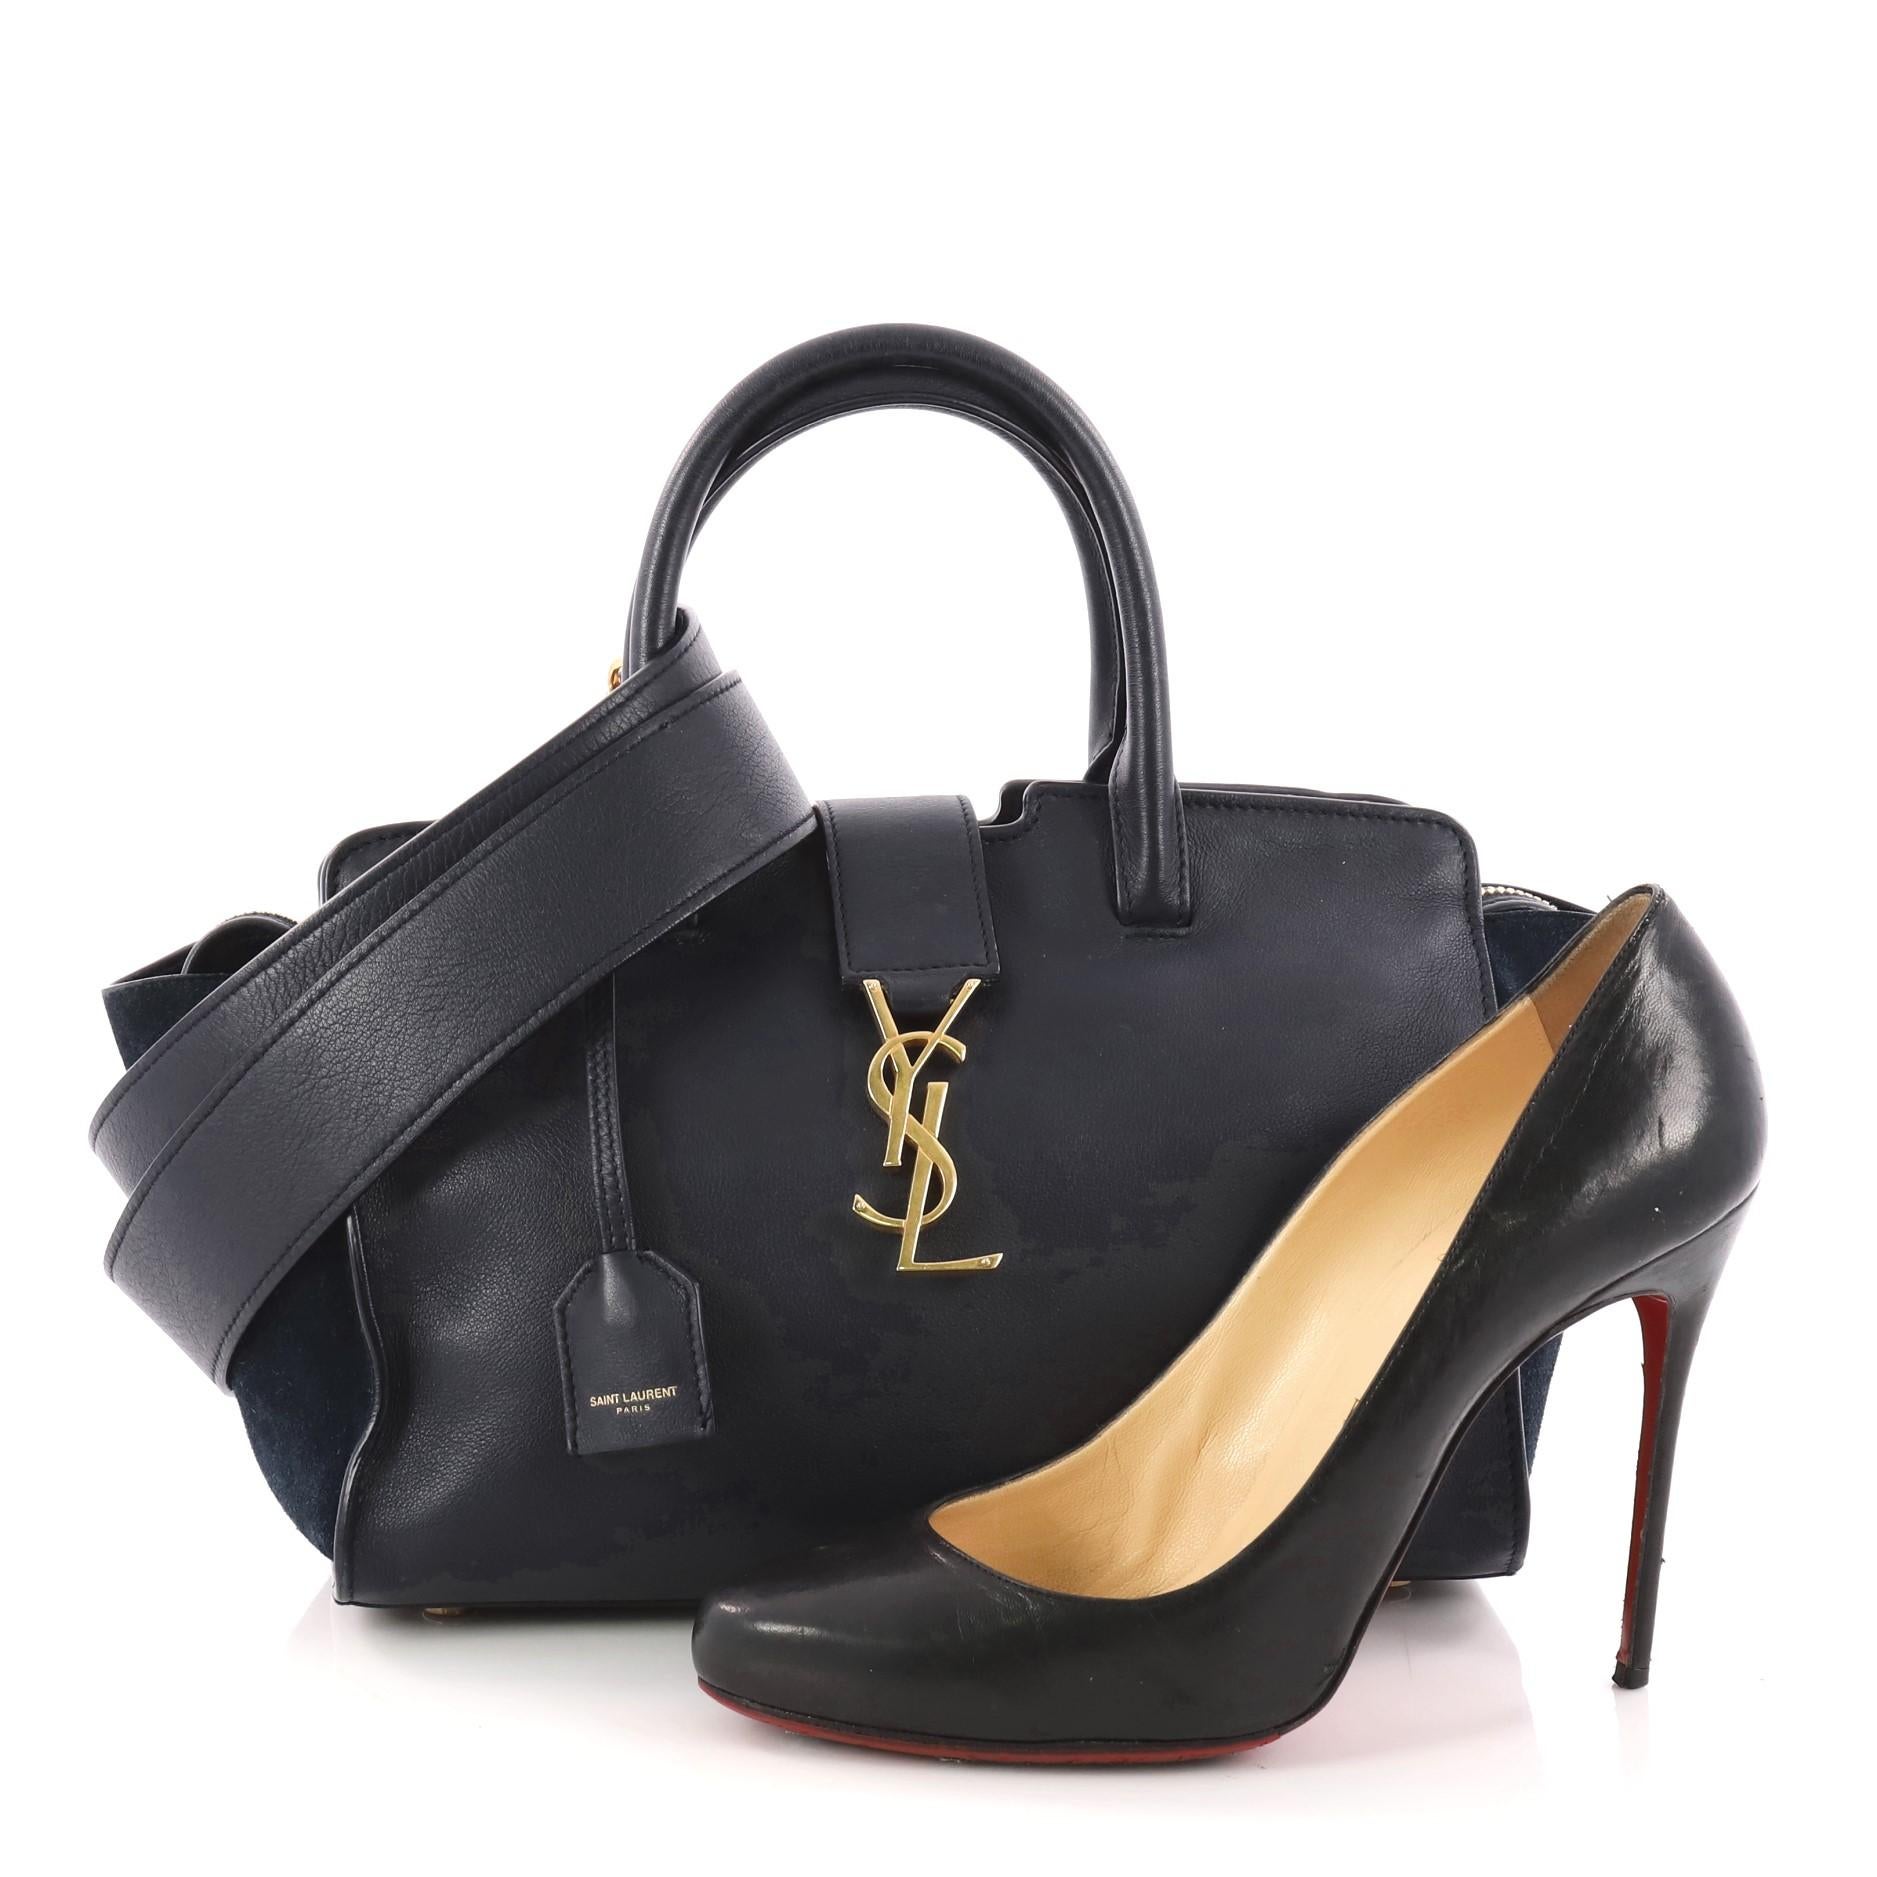 This authentic Saint Laurent Monogram Cabas Downtown Leather Baby combines a modern and functional style with an edgy twist. Crafted from navy leather and suede, this boxy satchel features dual-rolled handles, YSL metal logo at the front, protective